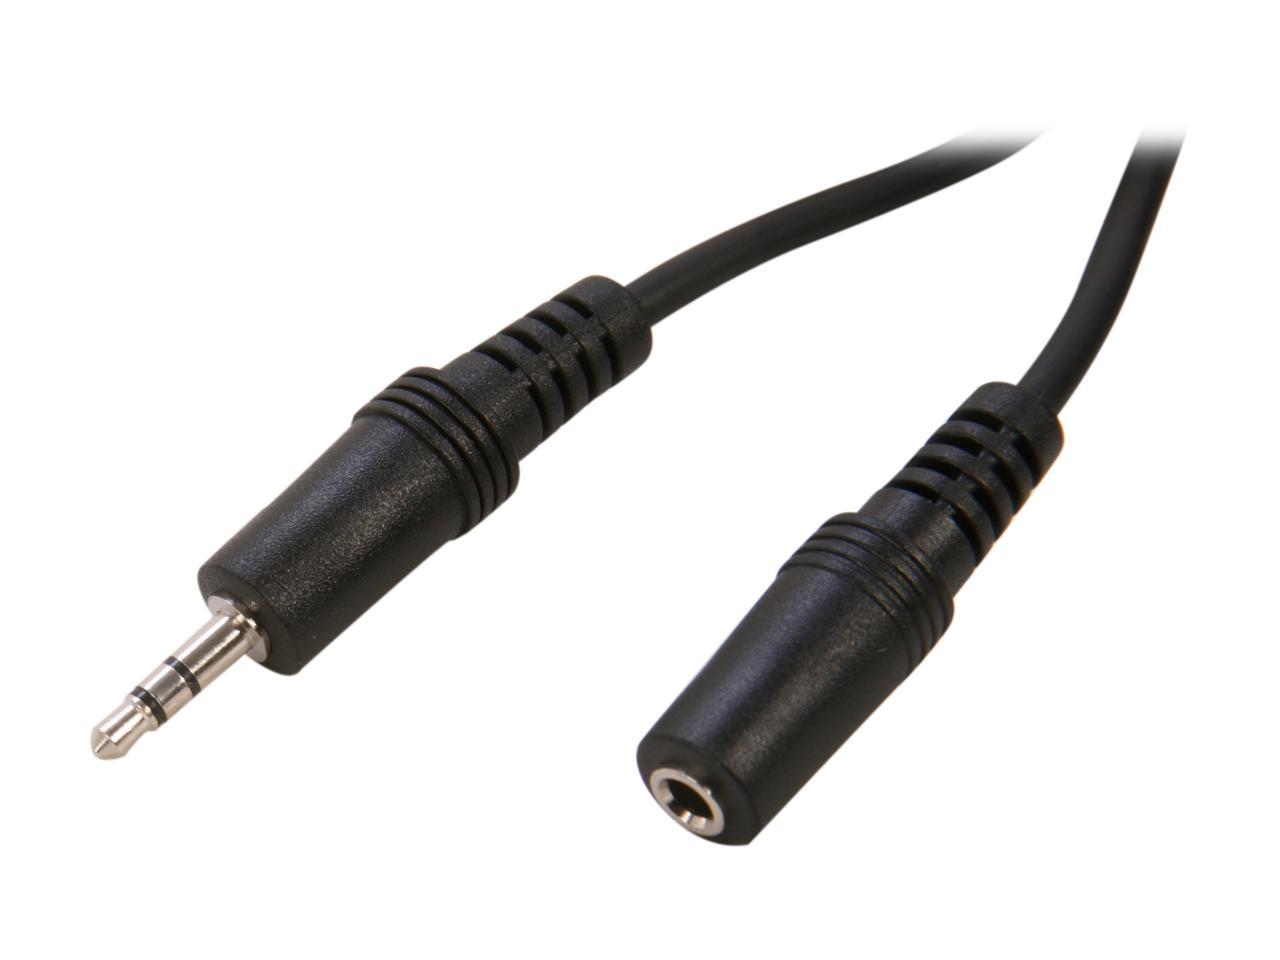 Tablets Stereo Jack Cord for Phones Headphones KINPS Audio Auxiliary Stereo Audio Cable 3.5mm Stereo Jack Male to Male 10ft/3m, Black and White MP3 Players and More Speakers PCs 